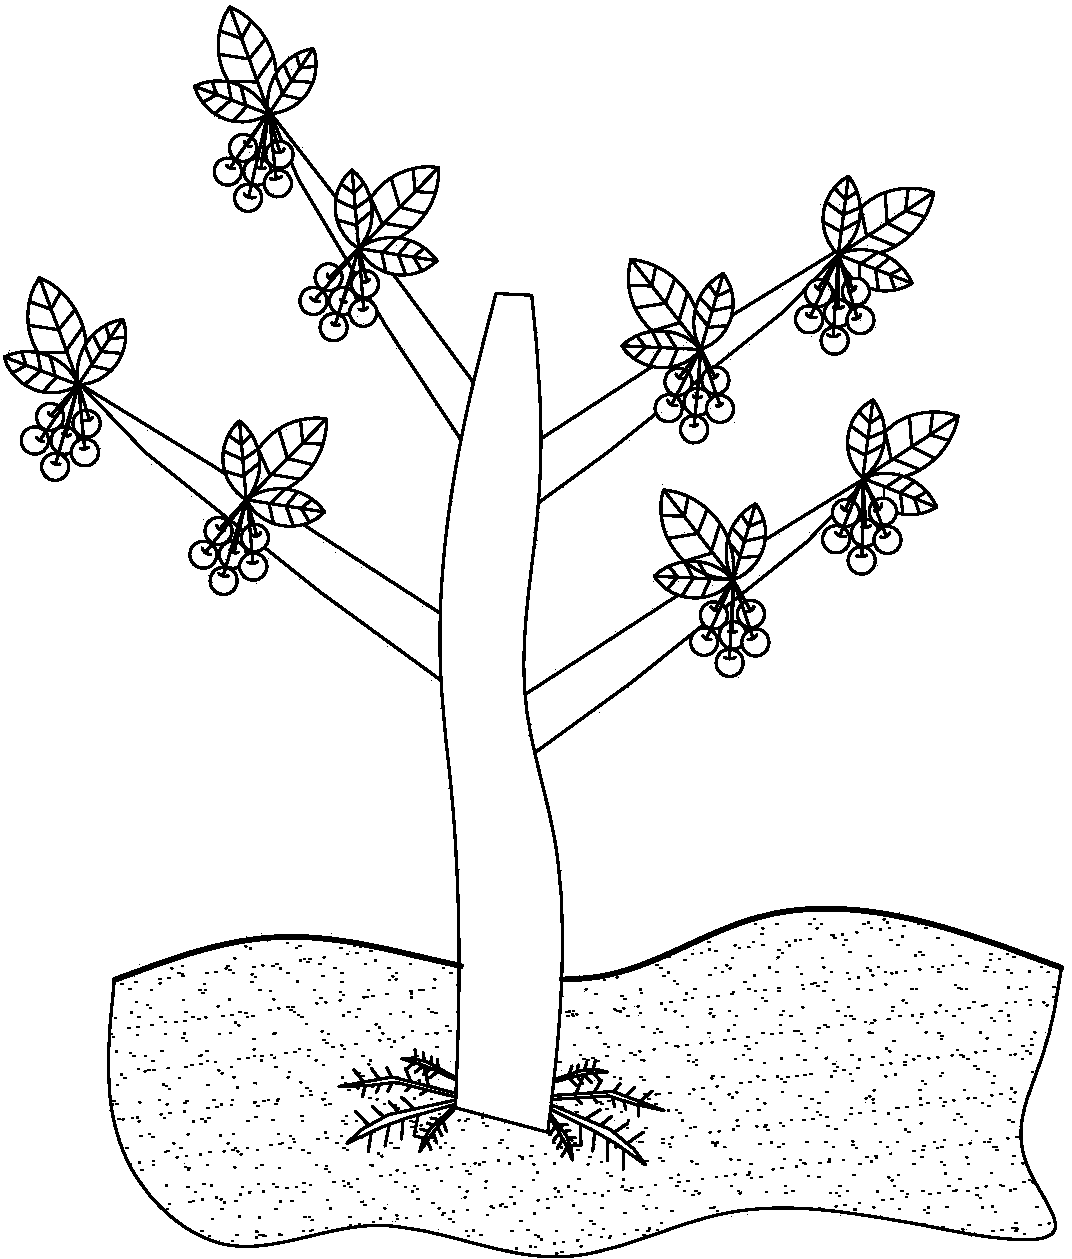 Propagation method for fruition of large cherries after division